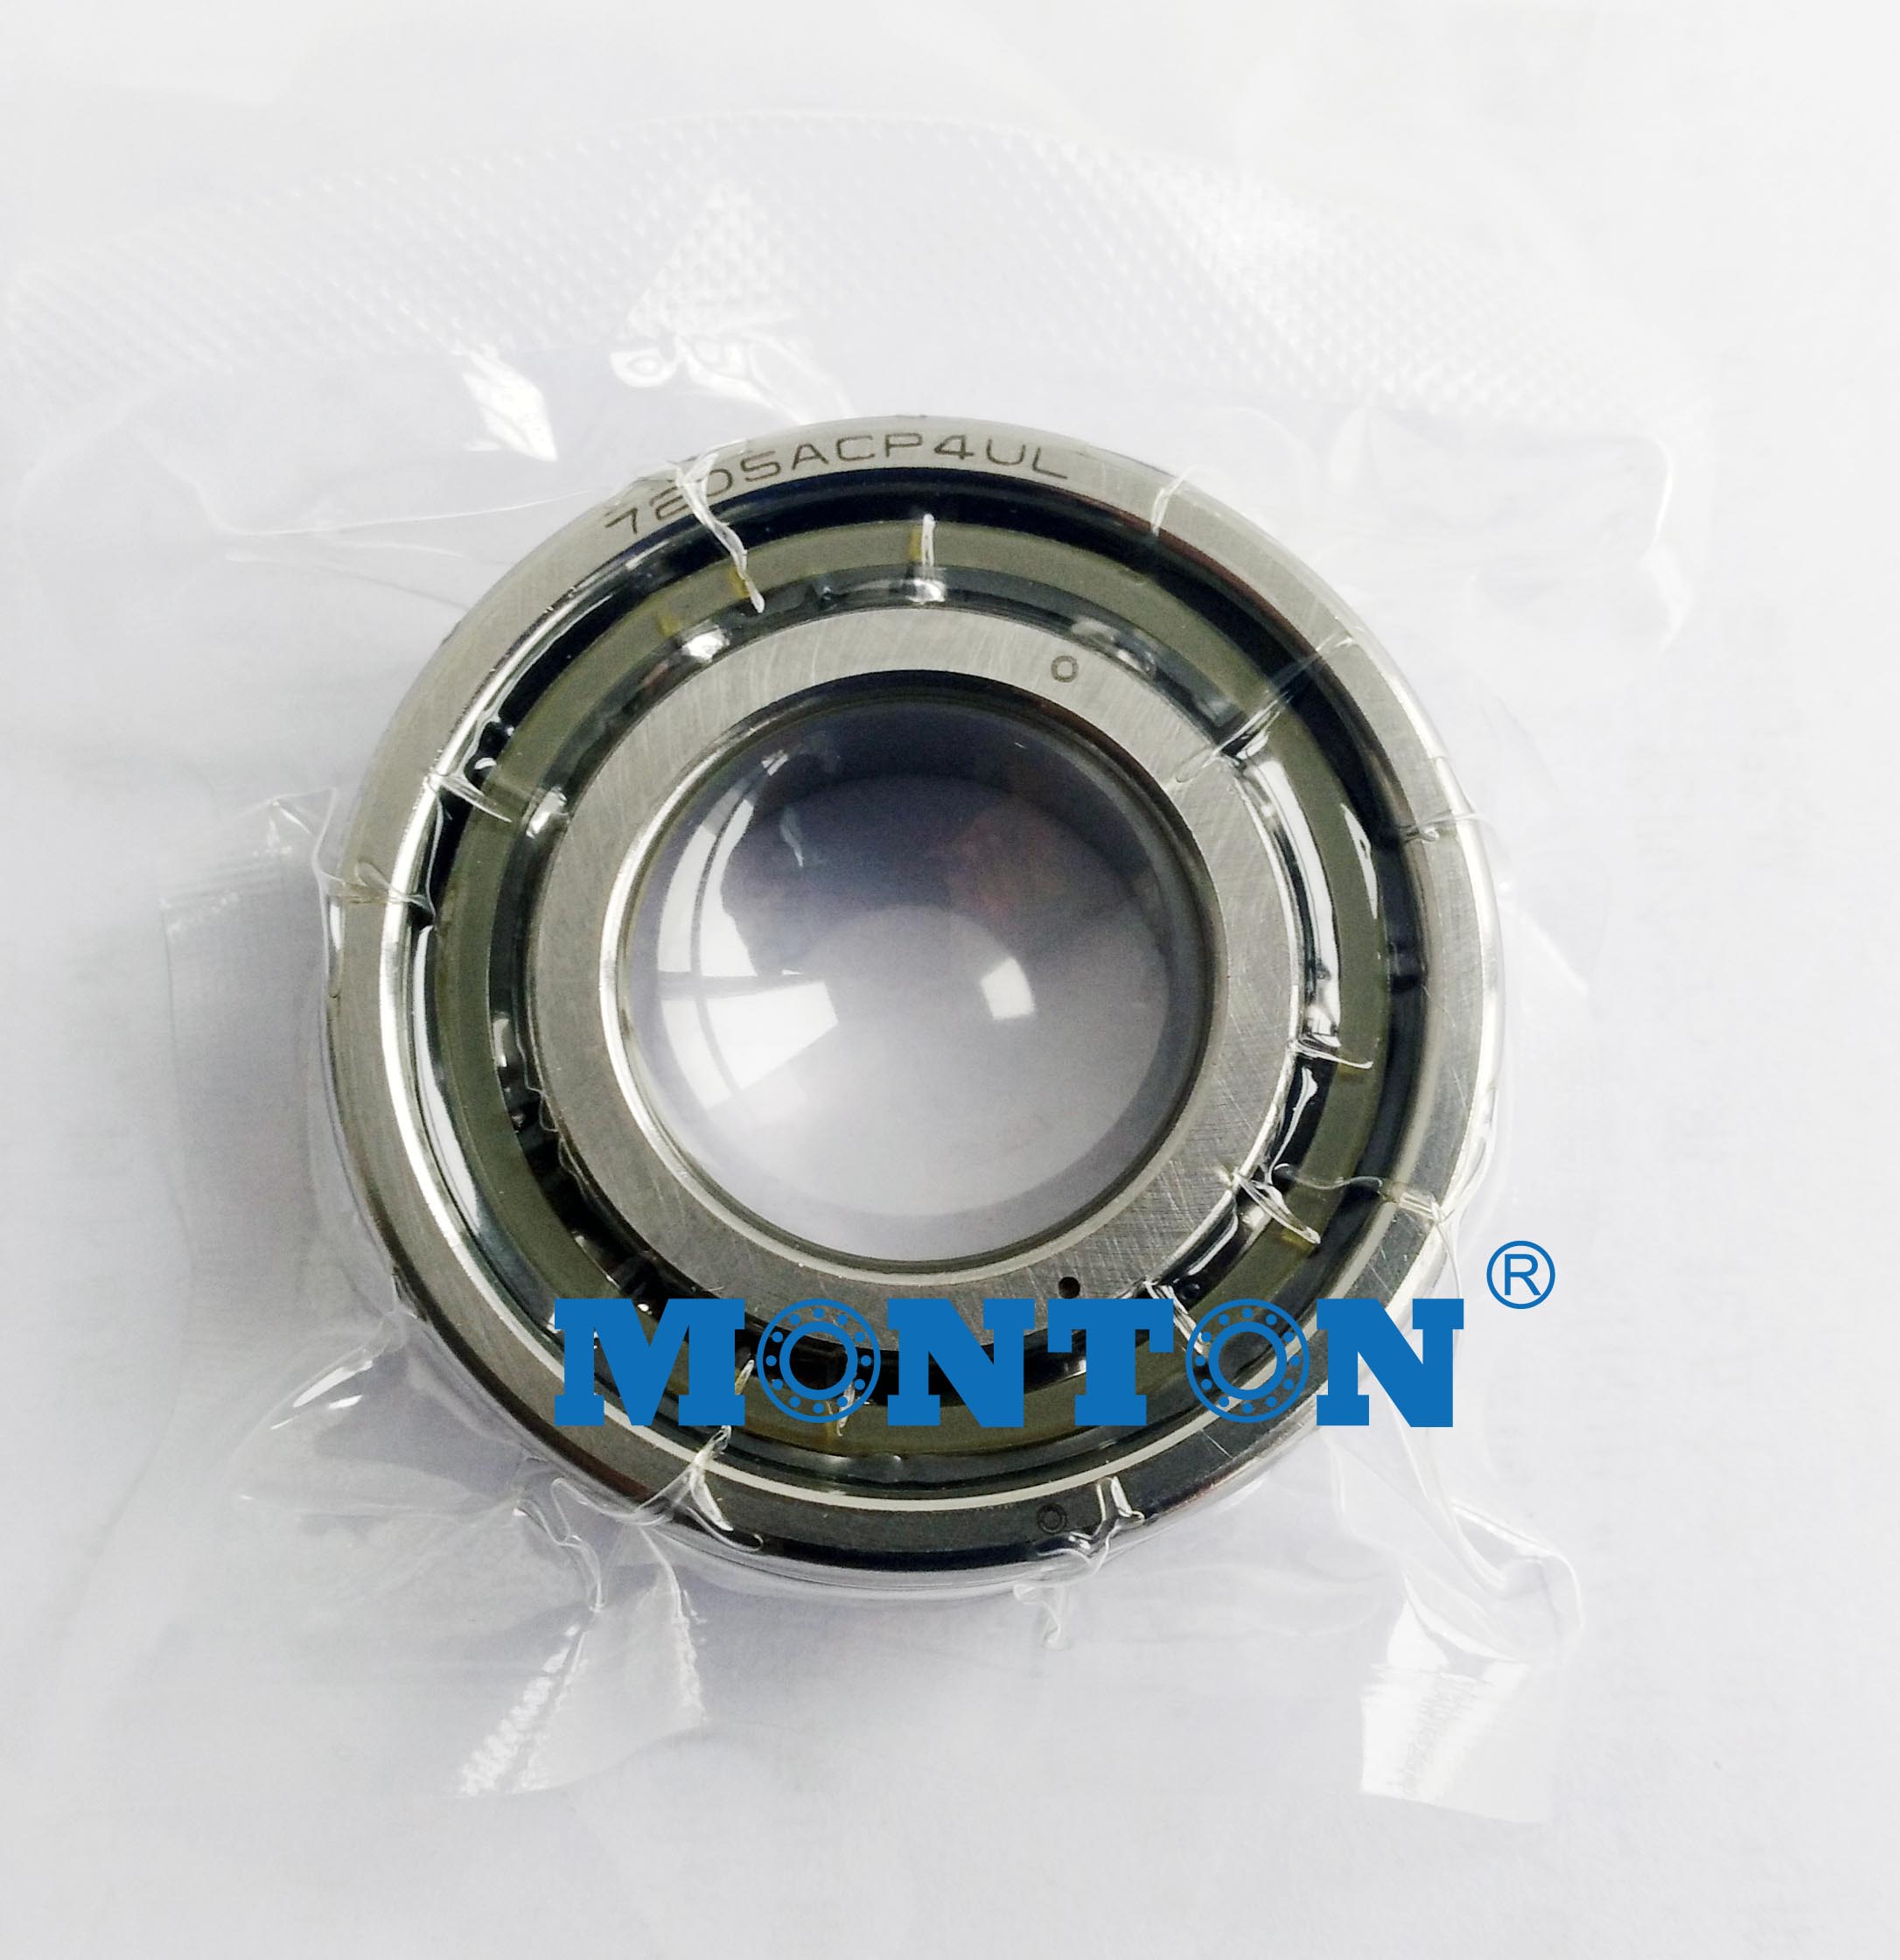 7205 ACDP4ADGA Super Precision Angular Contact Bearing - 25 mm ID, 52 mm OD, 15 mm Width, 25 ° Contact, ABEC 7